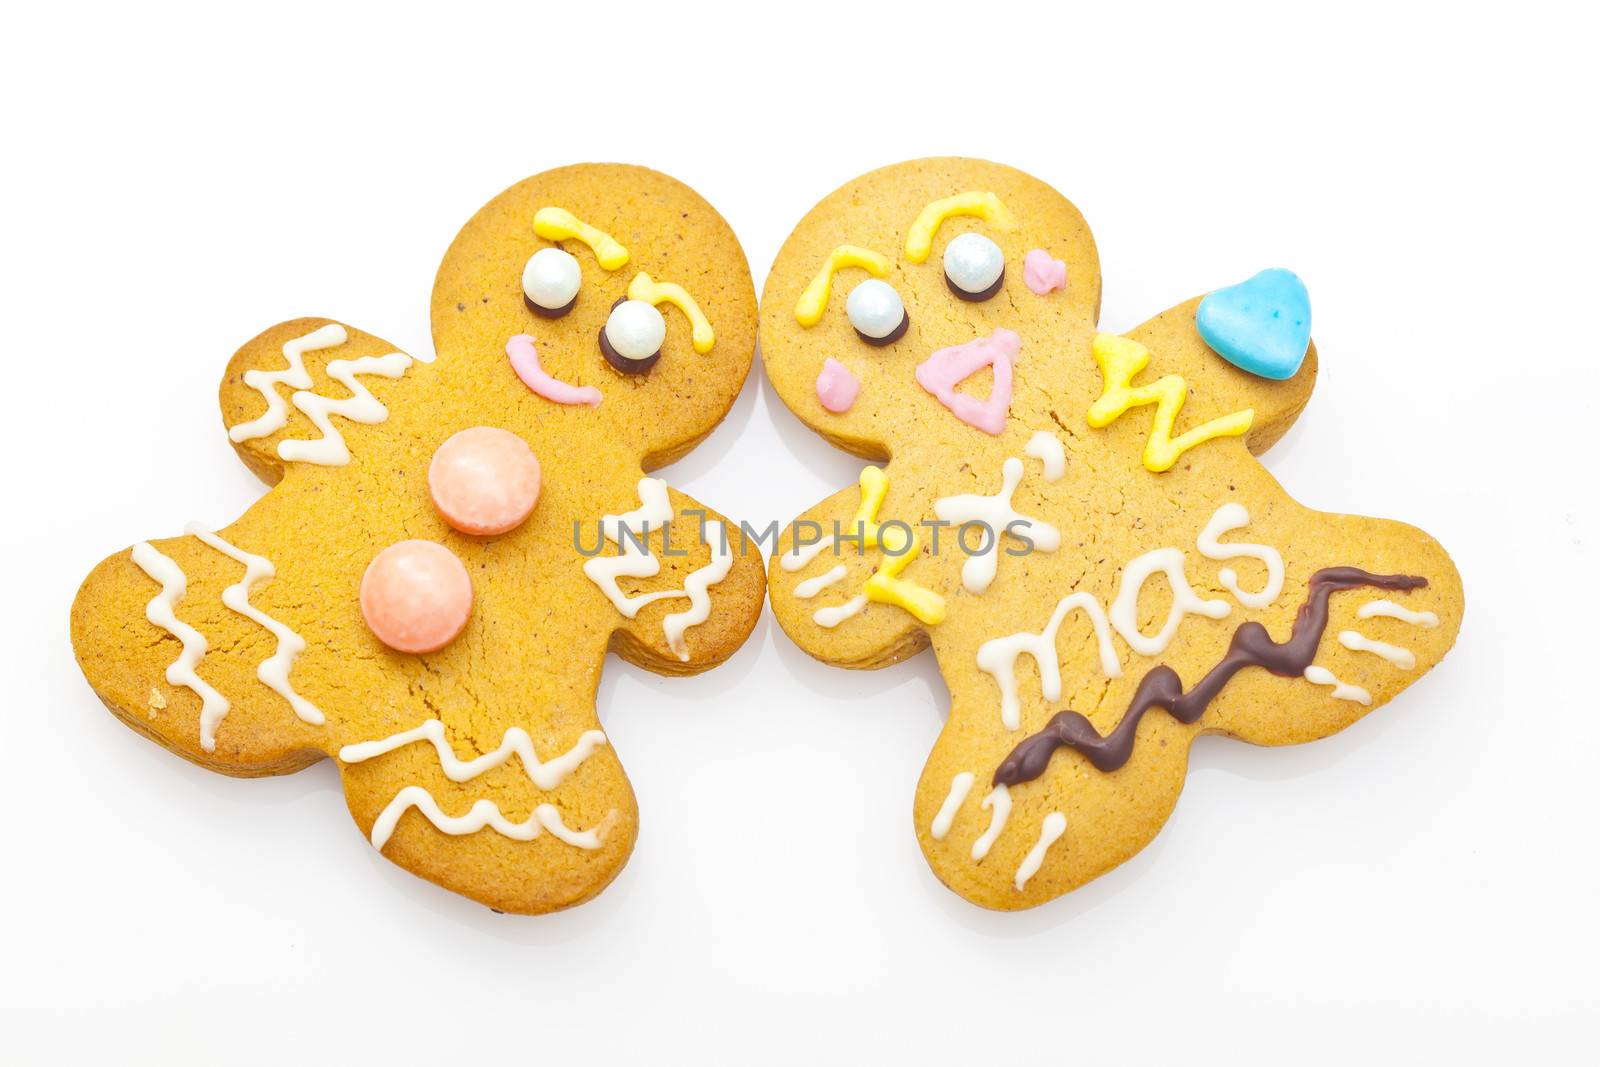 Ginger bread man cookies isolated on white background by kawing921